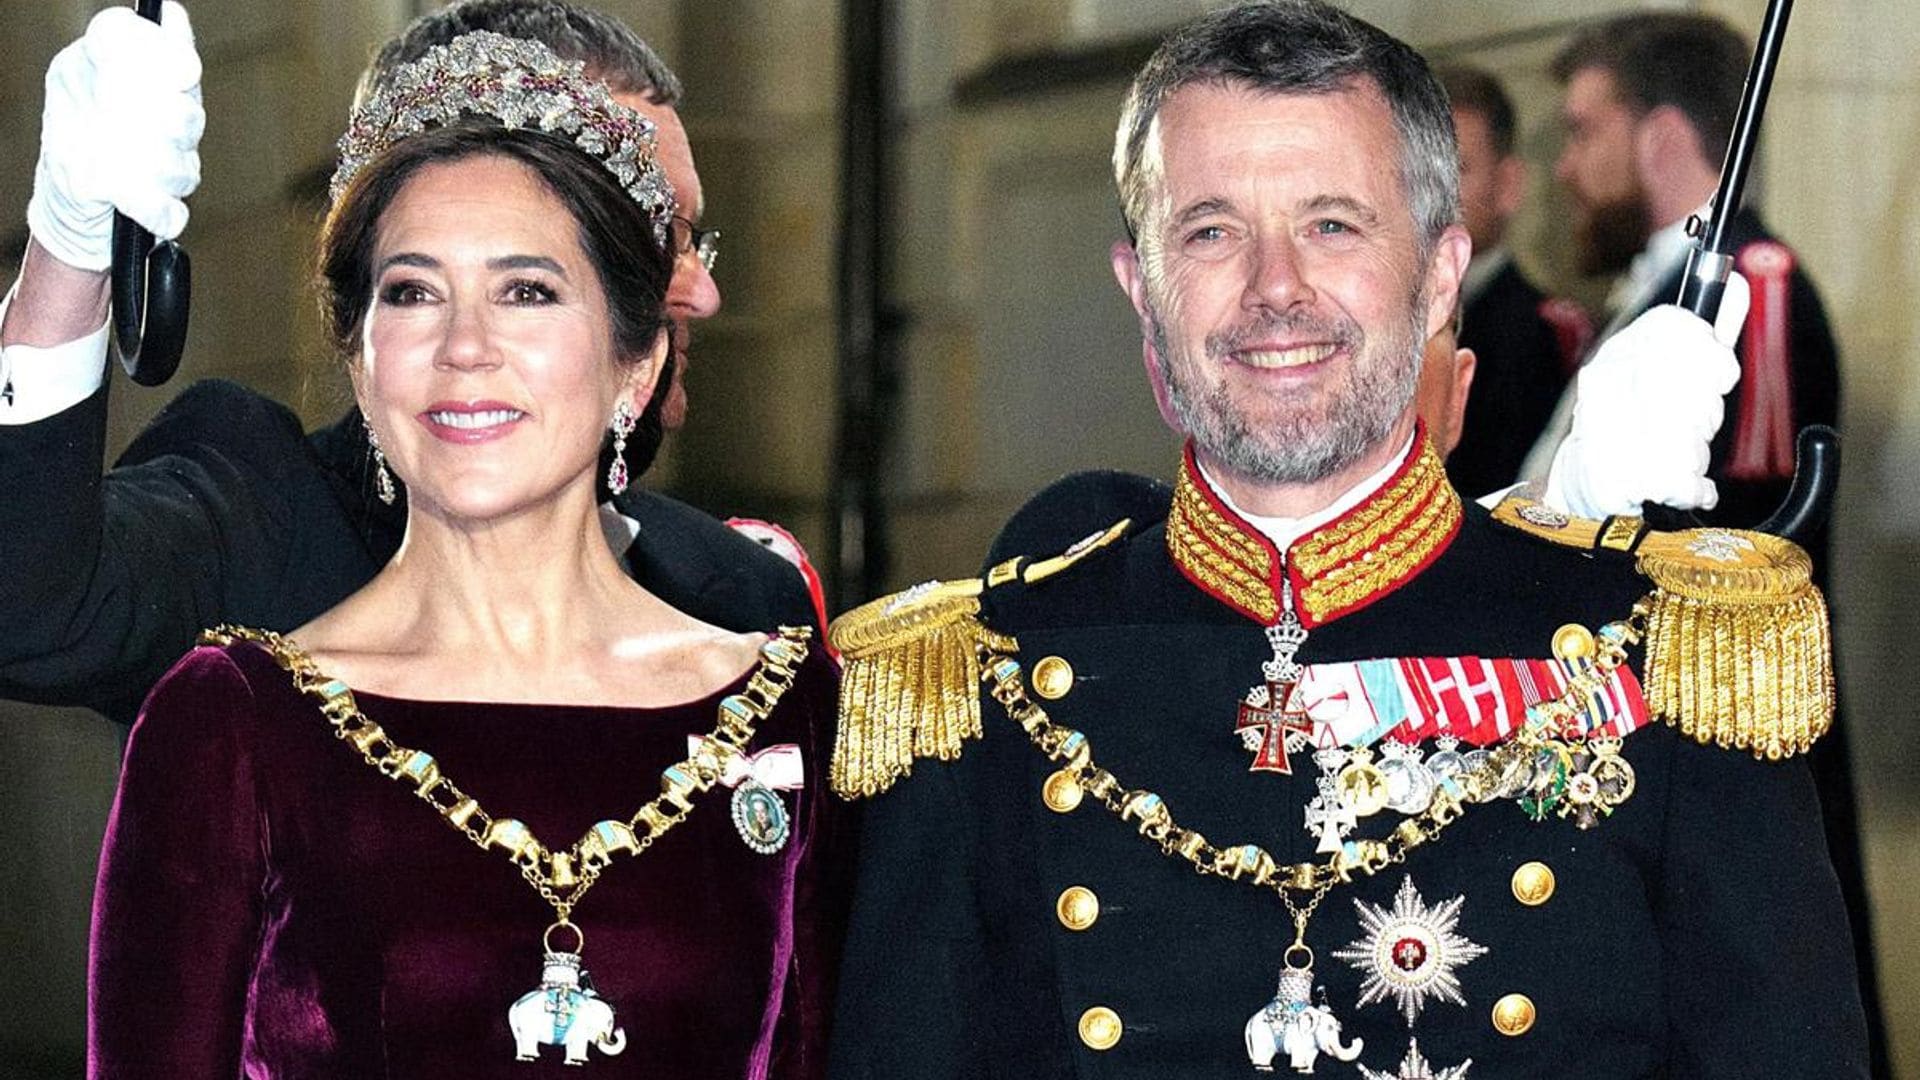 Crown Princess Mary steps out following Queen's abdication announcement